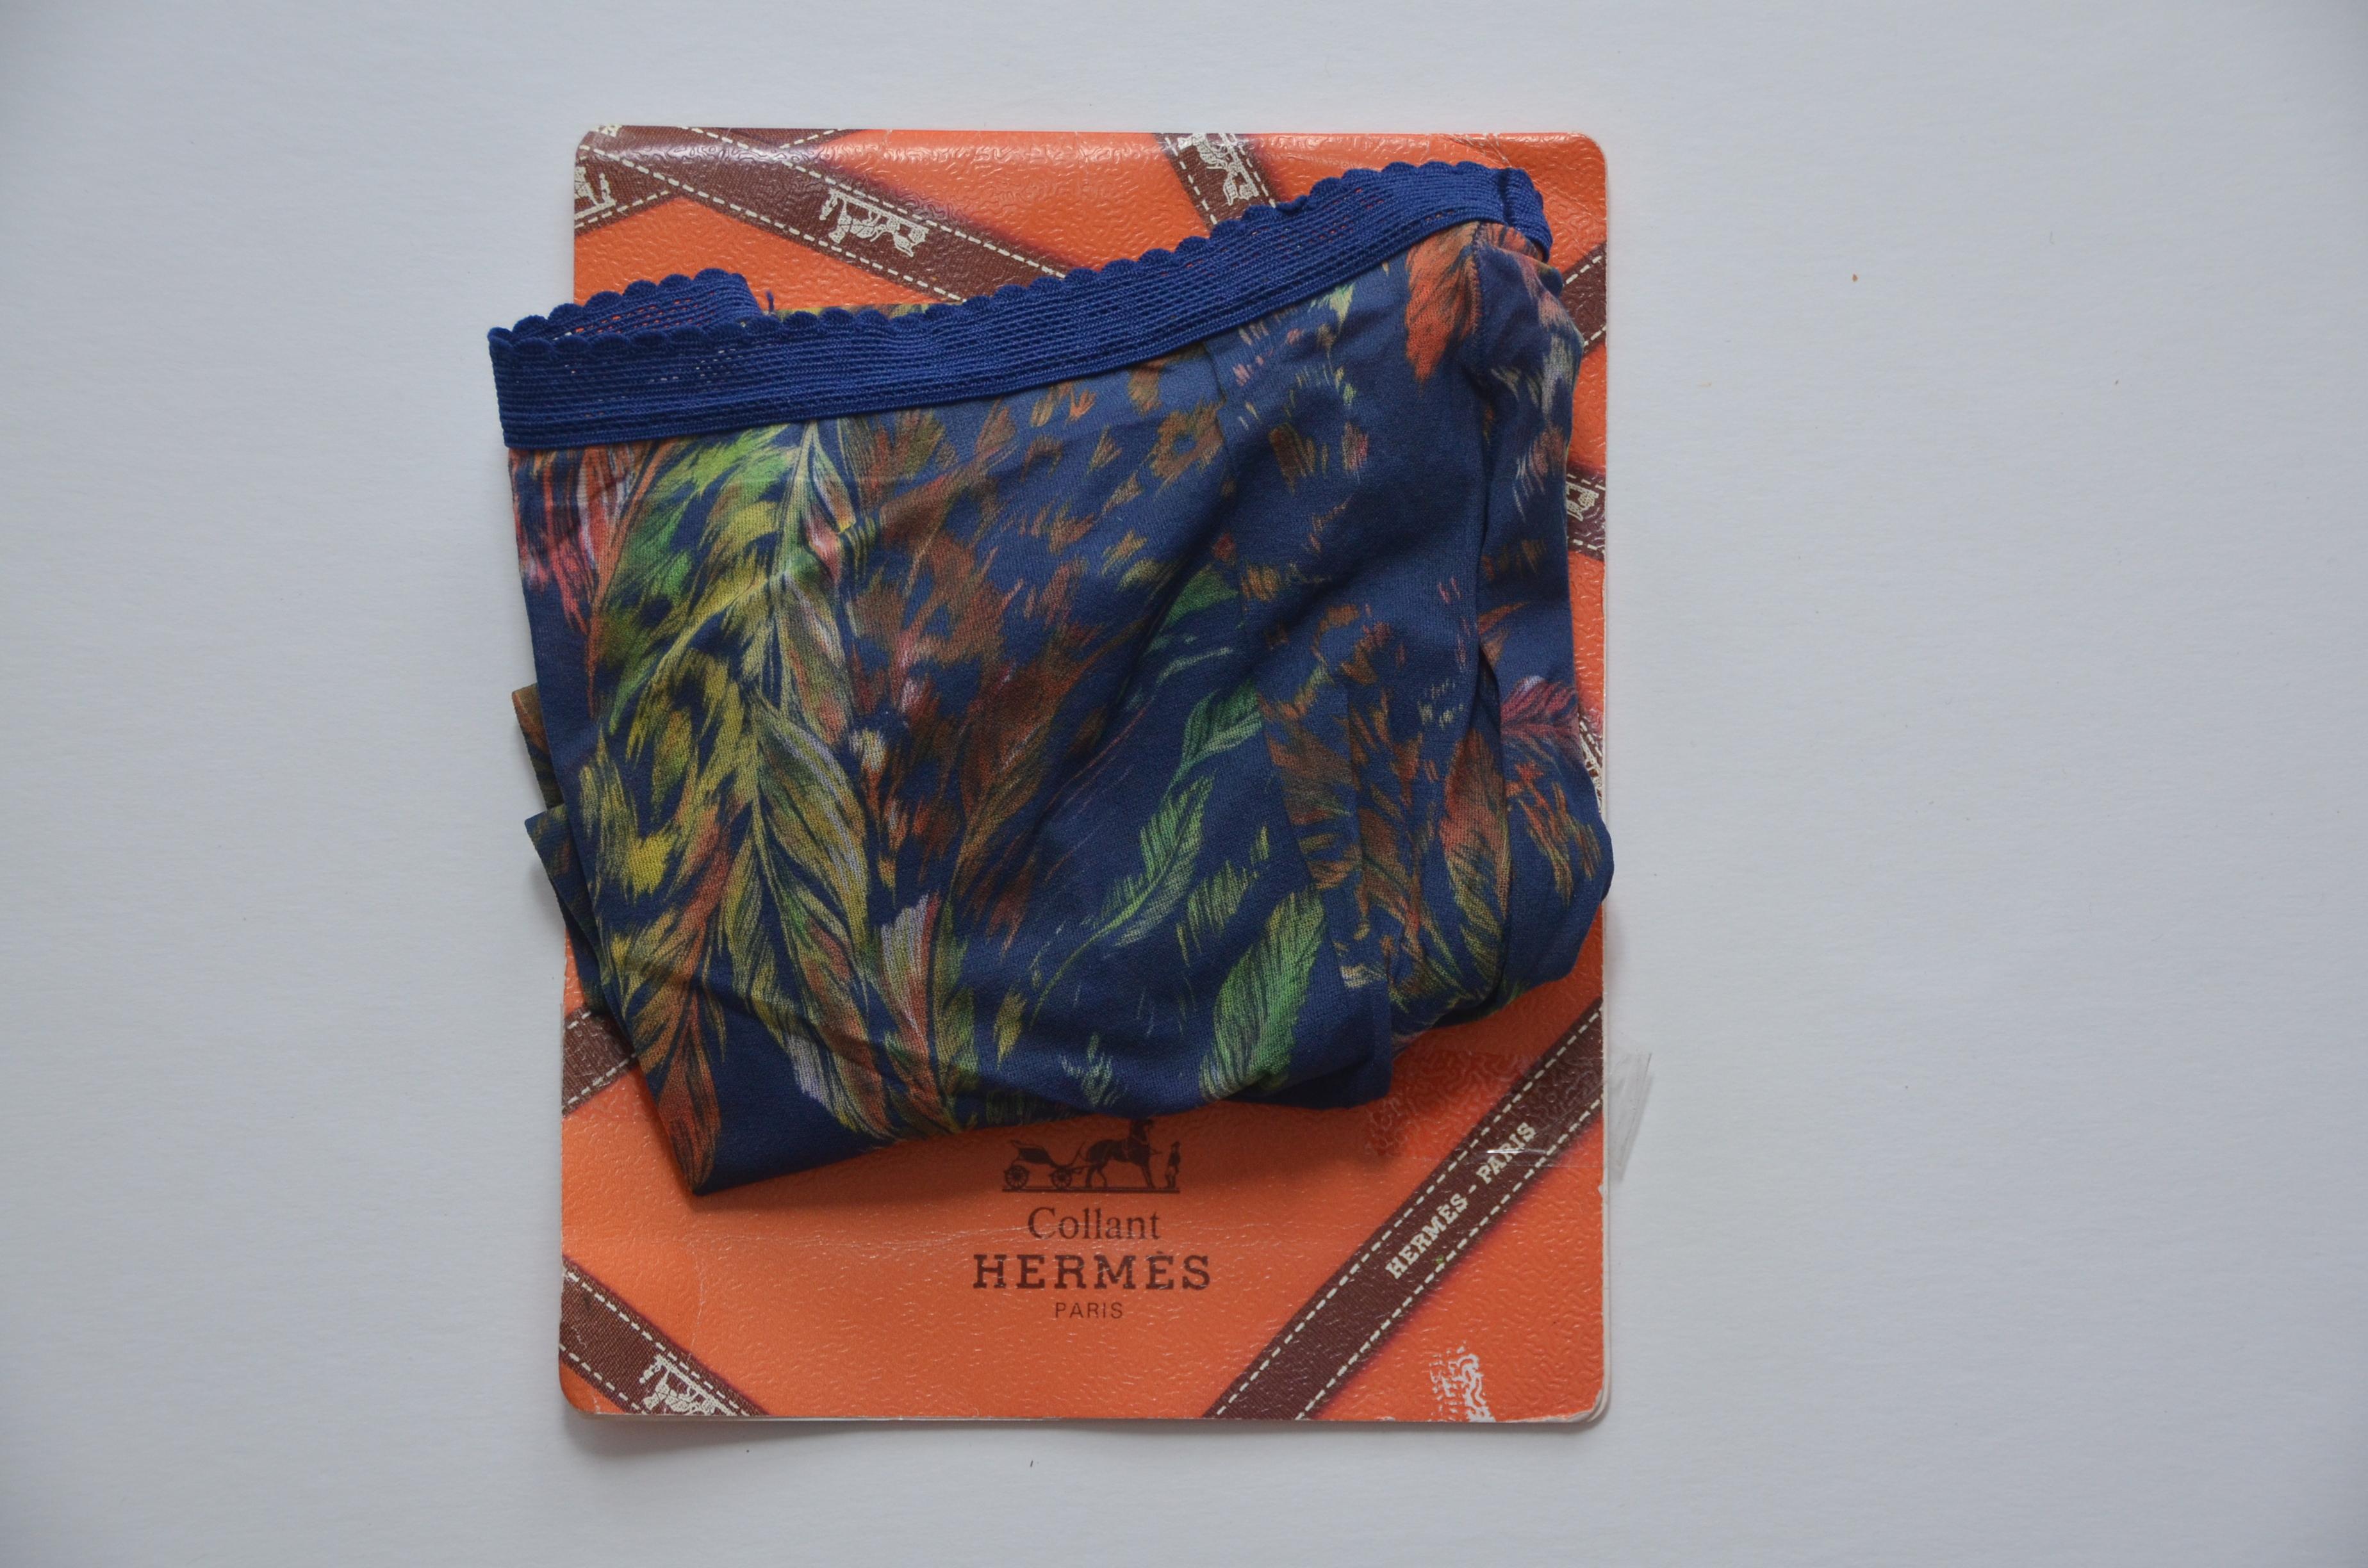 Hermes 2 pairs of pantyhose 

Size not listed ,my personal opinion is that these are size S
H printed at waist
Original paper bag included 

FINAL SALE